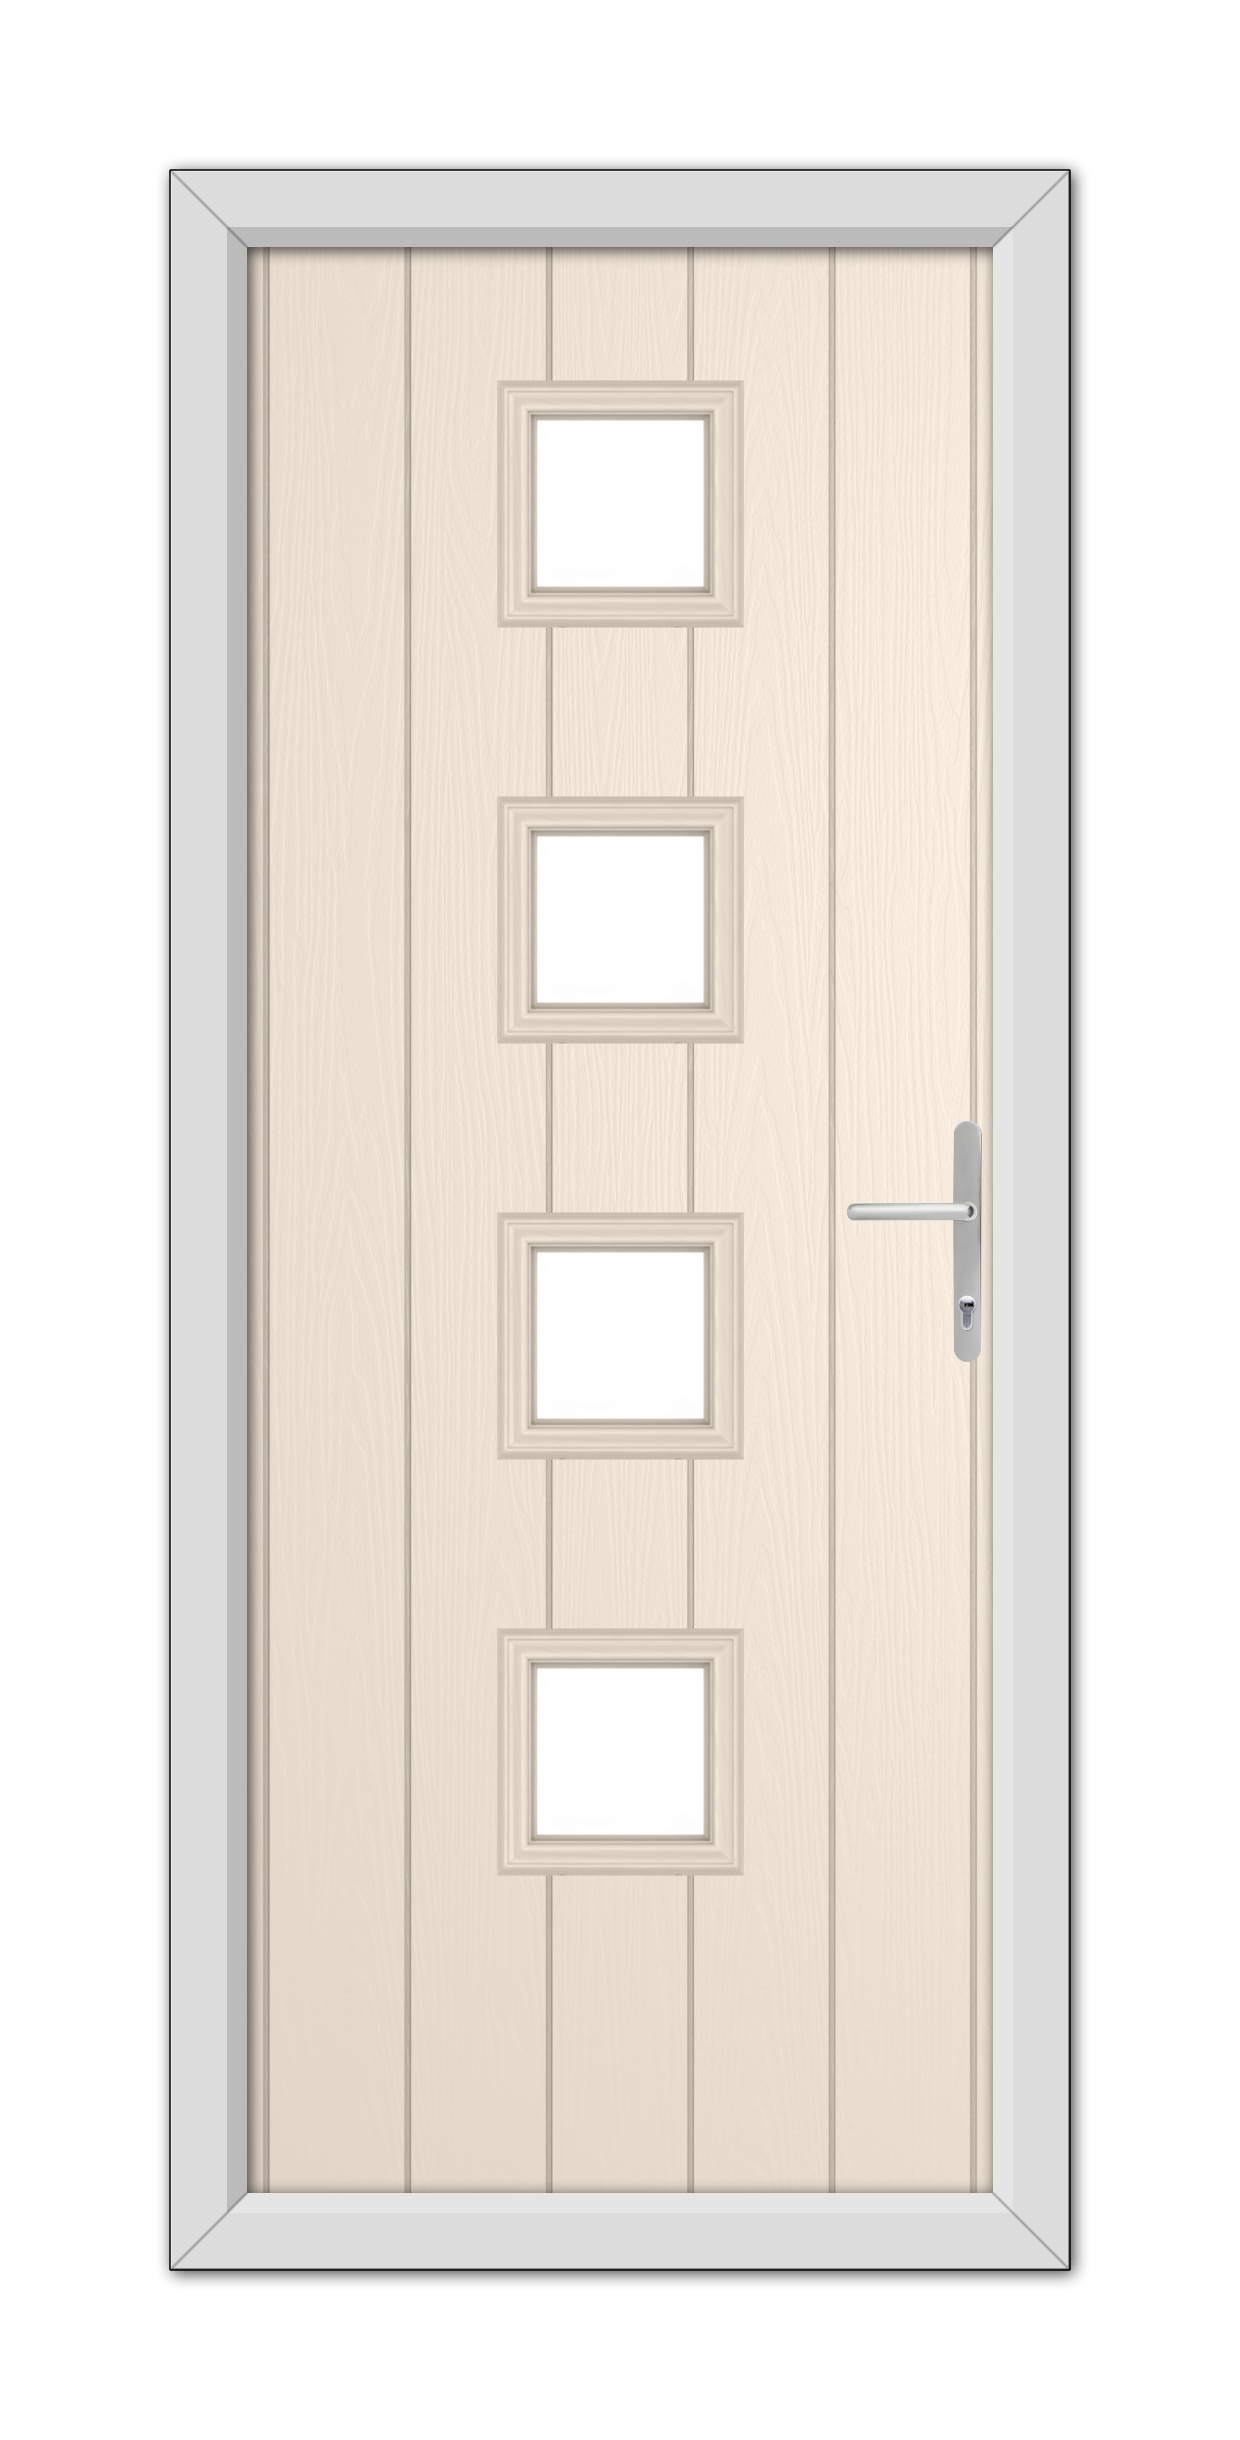 A Cream Hamilton Composite Door 48mm Timber Core with a metallic handle and four rectangular glass panels, set within a grey frame.